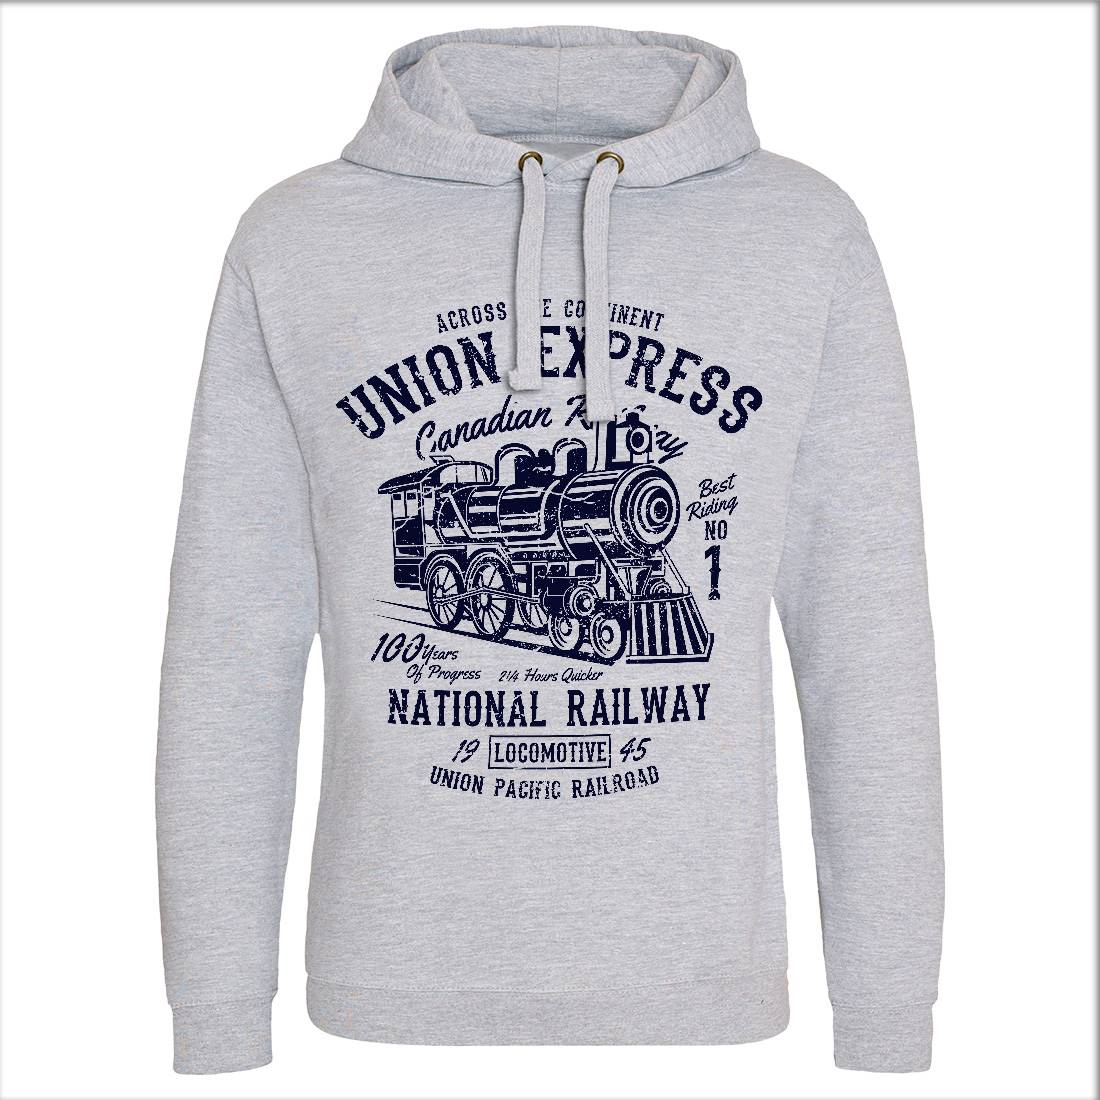 Union Express Mens Hoodie Without Pocket Vehicles A188